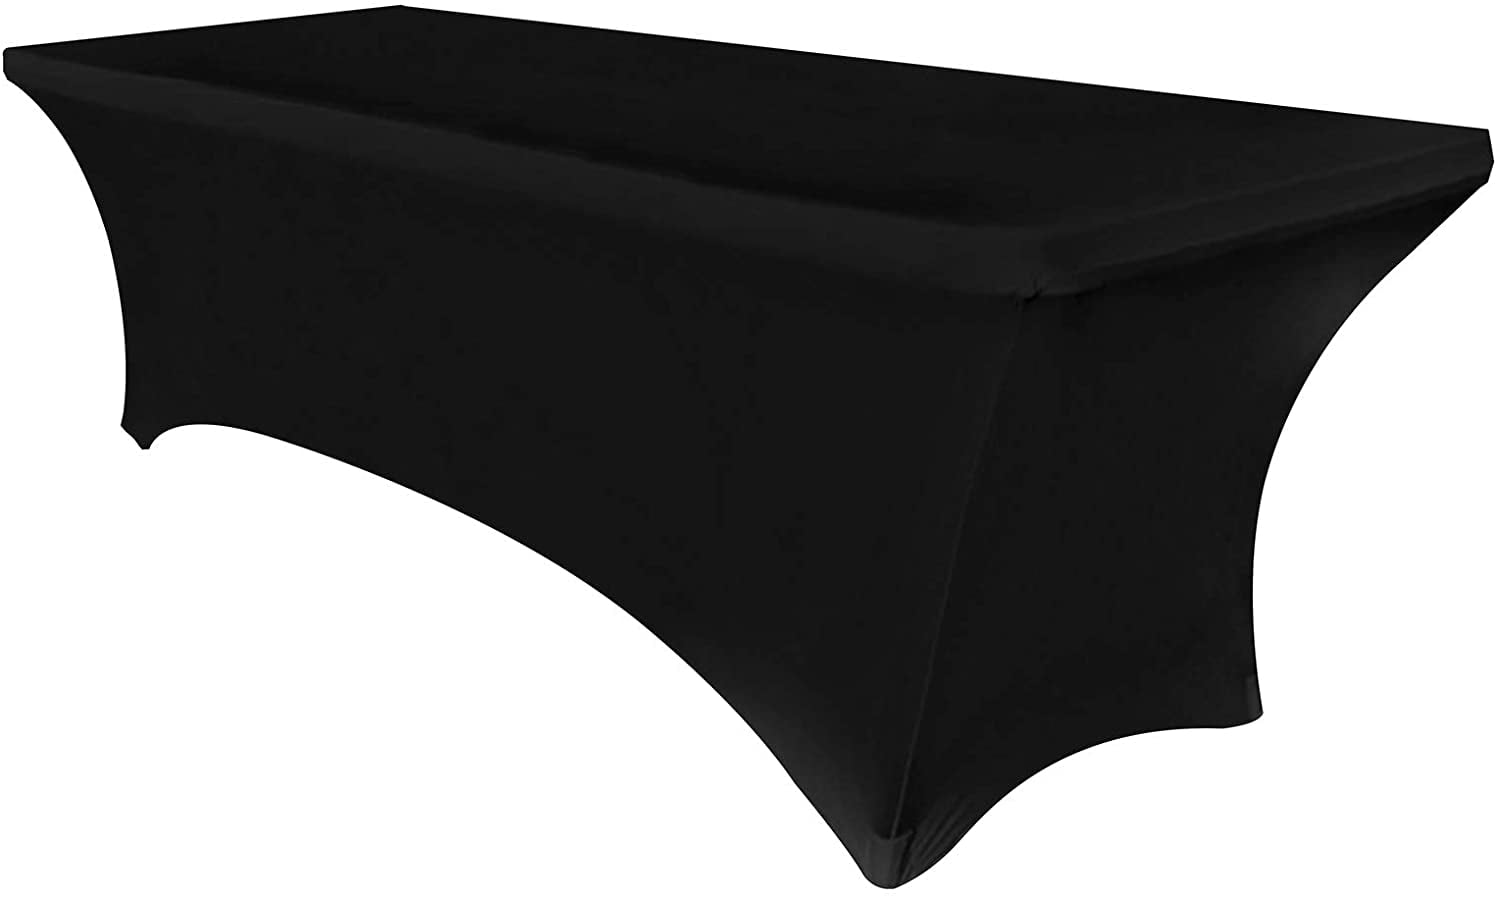 5 ft SPANDEX Fitted Tablecloth Stretch Table Cover WHITE Standard